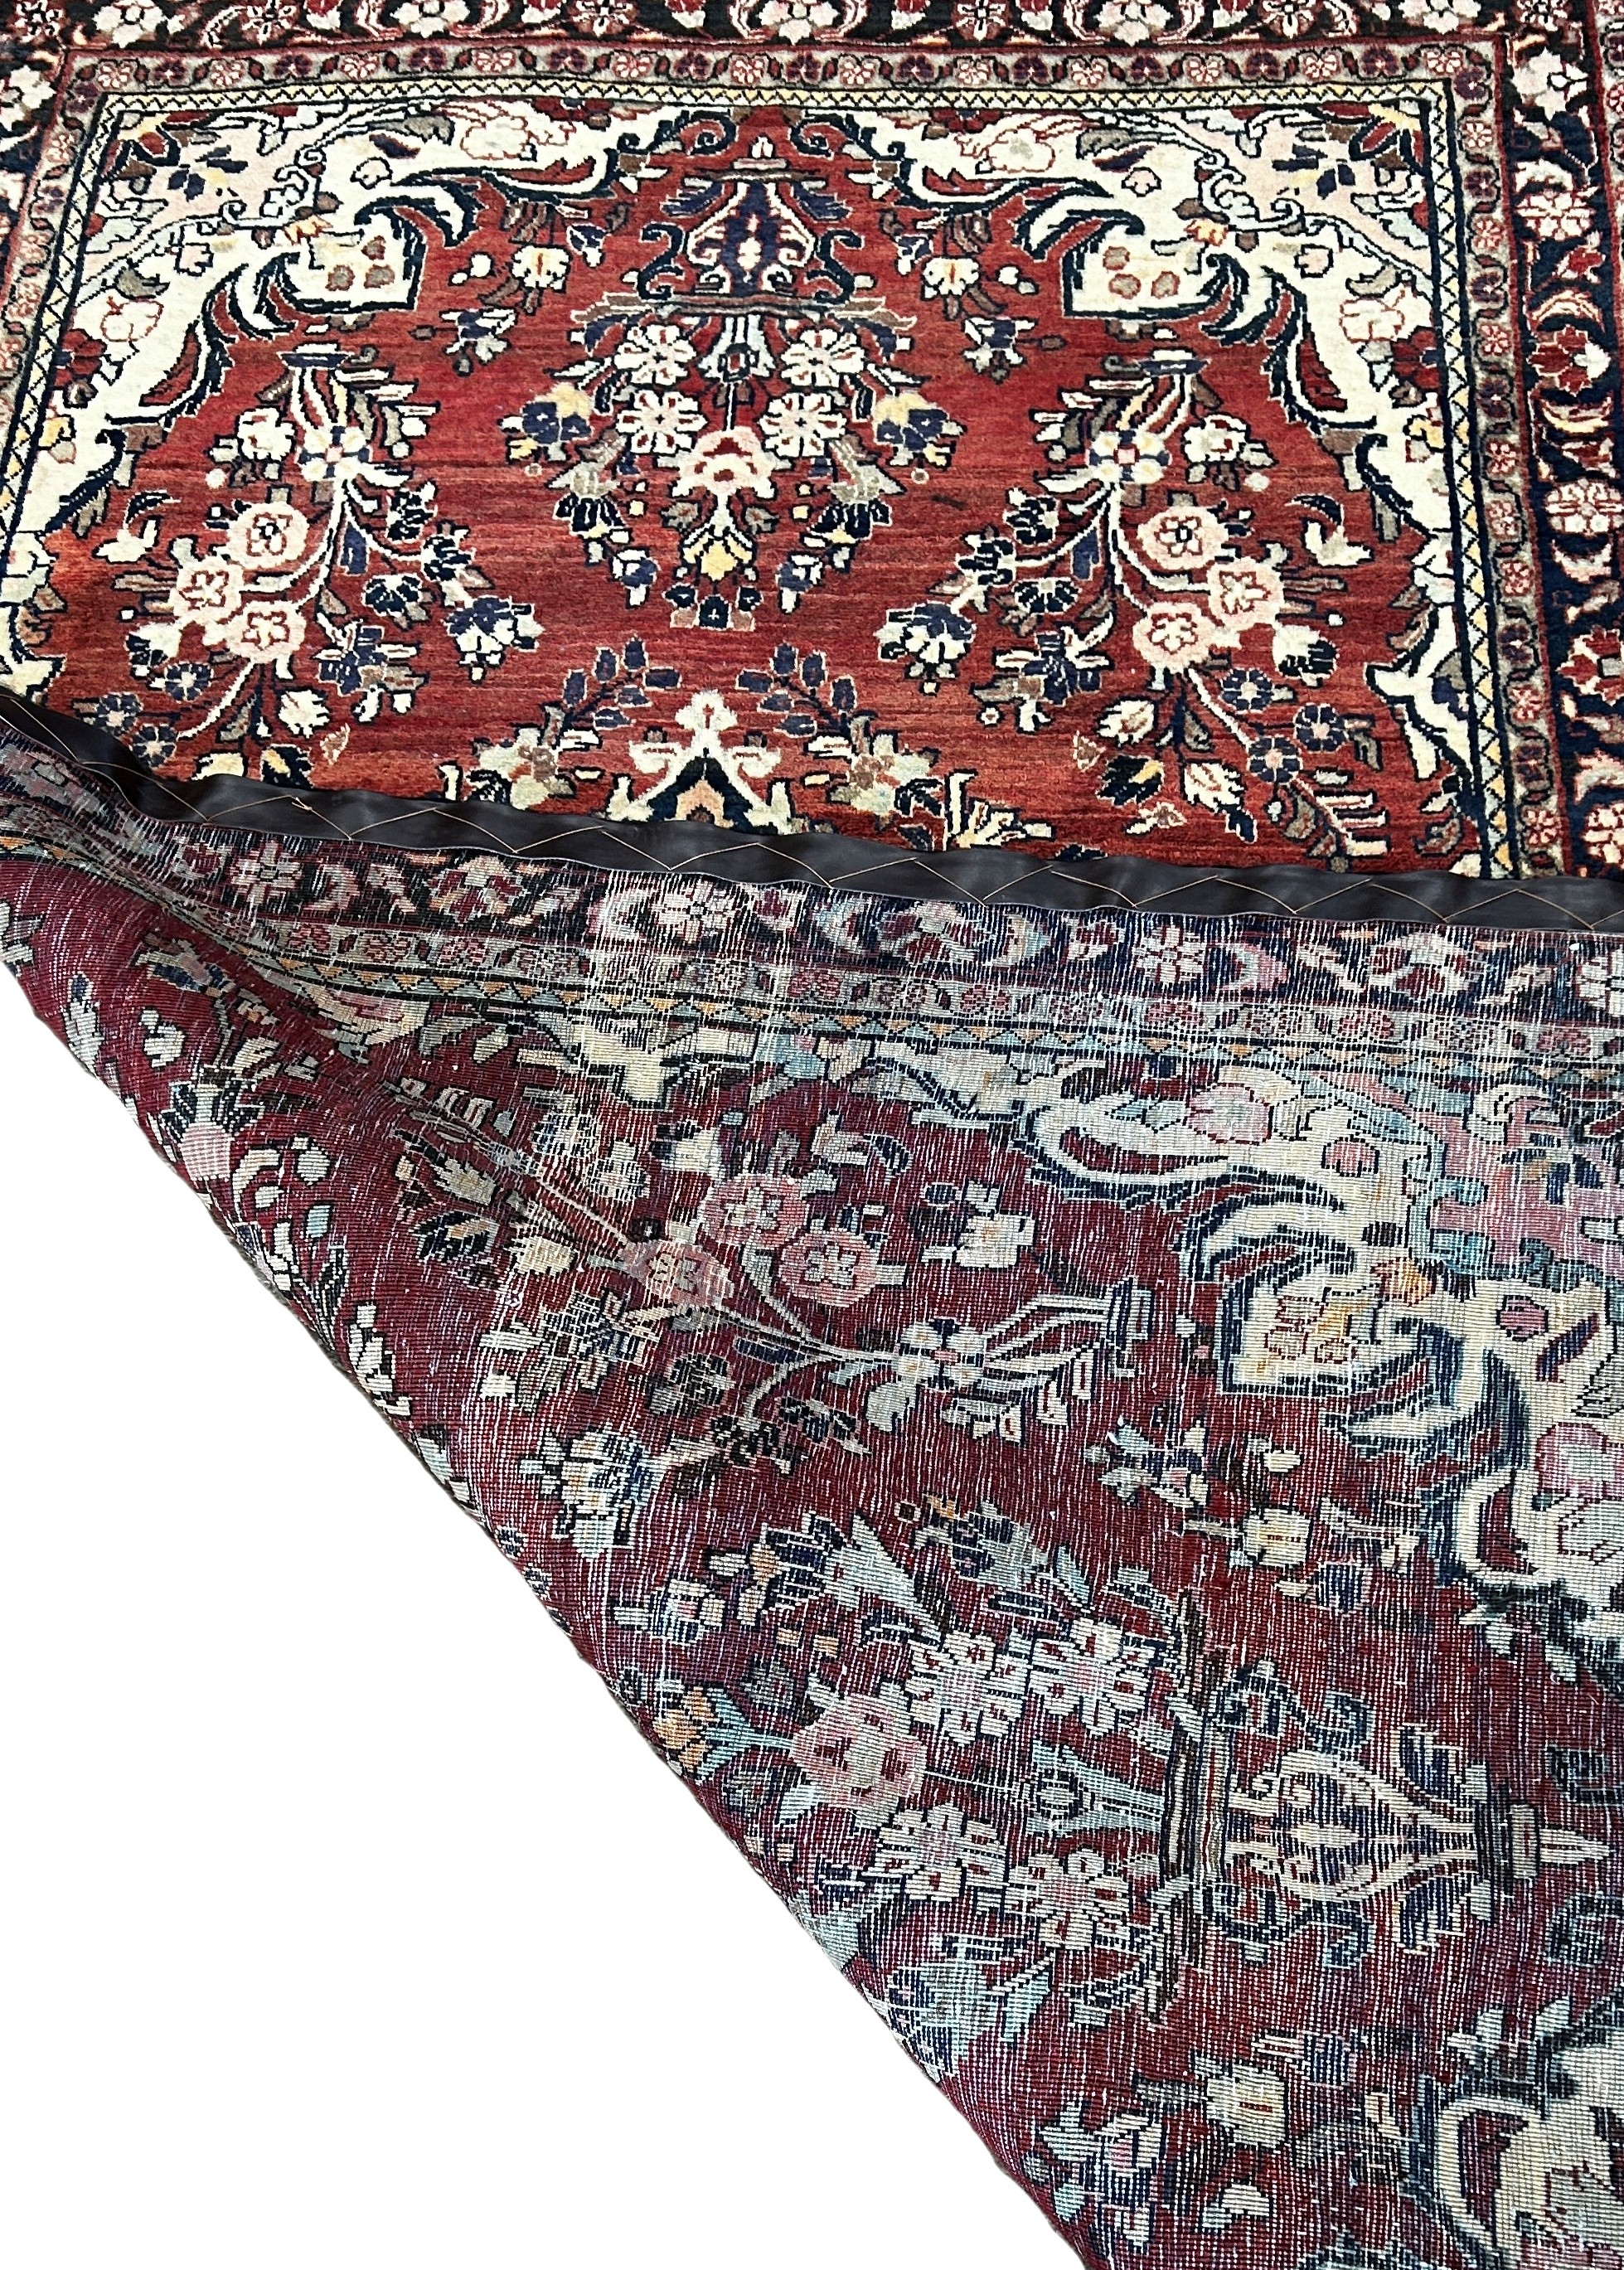 North West Persian Sarouk Mahal Rug, with a central floral medallion with clusters of flowers on a - Image 3 of 3